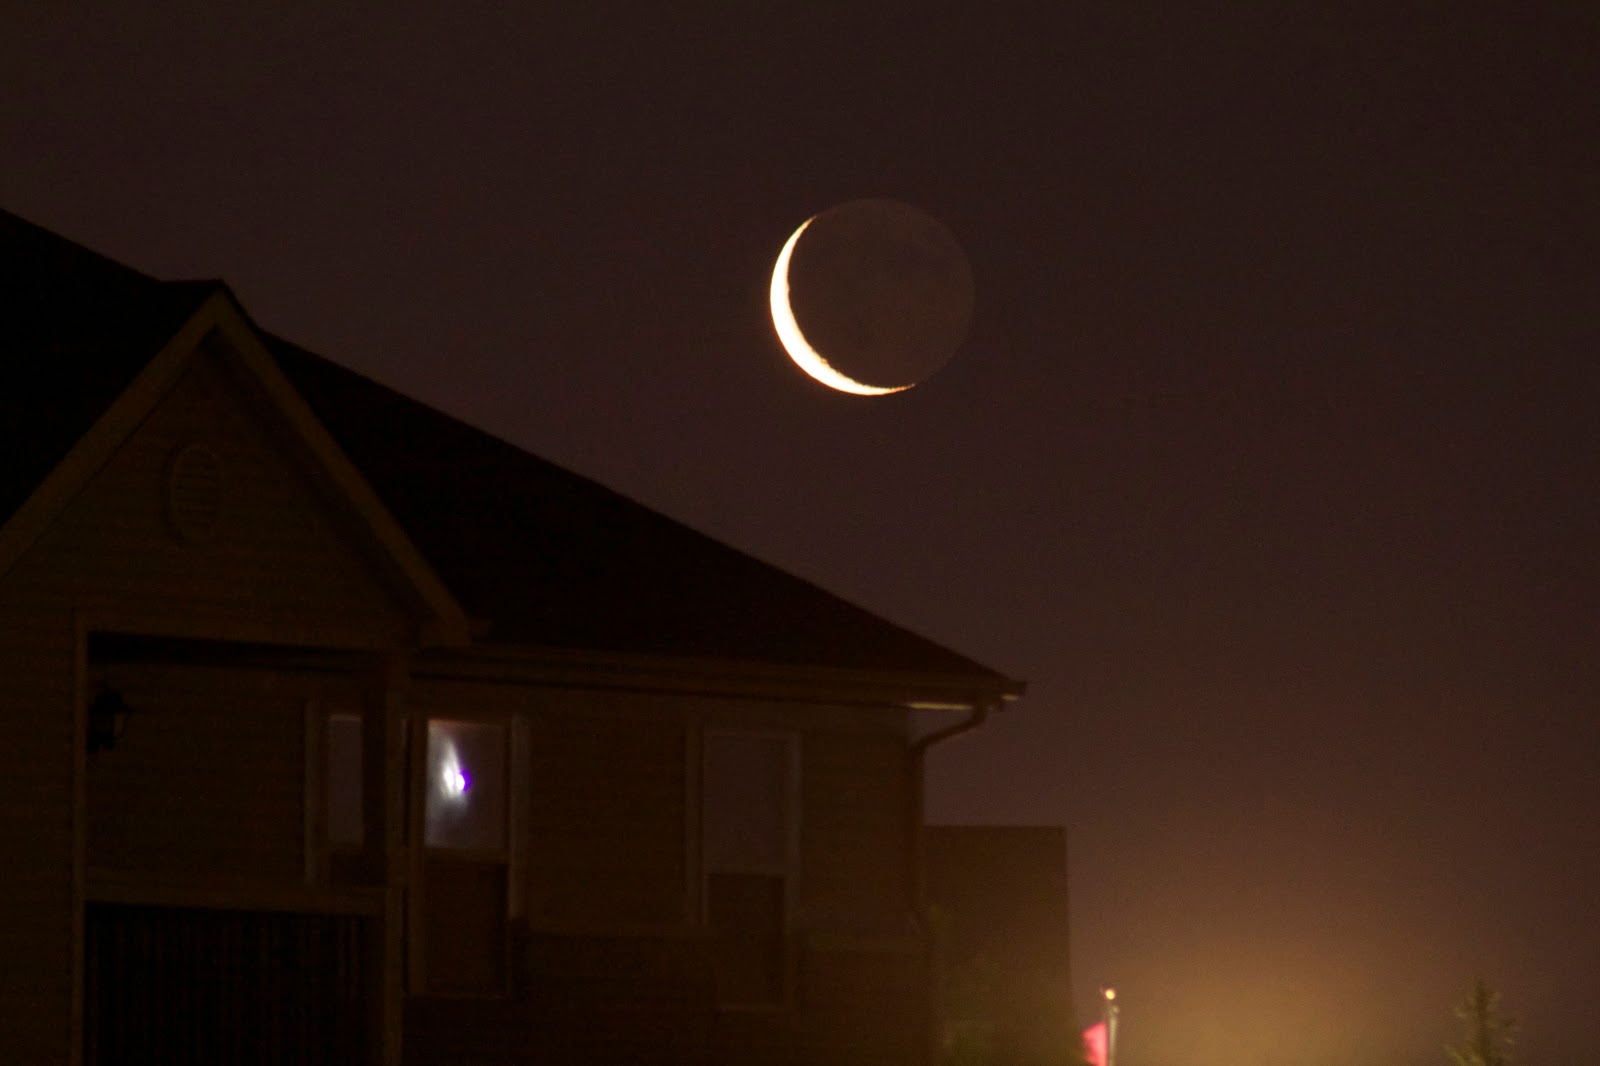 crescent moon over roof